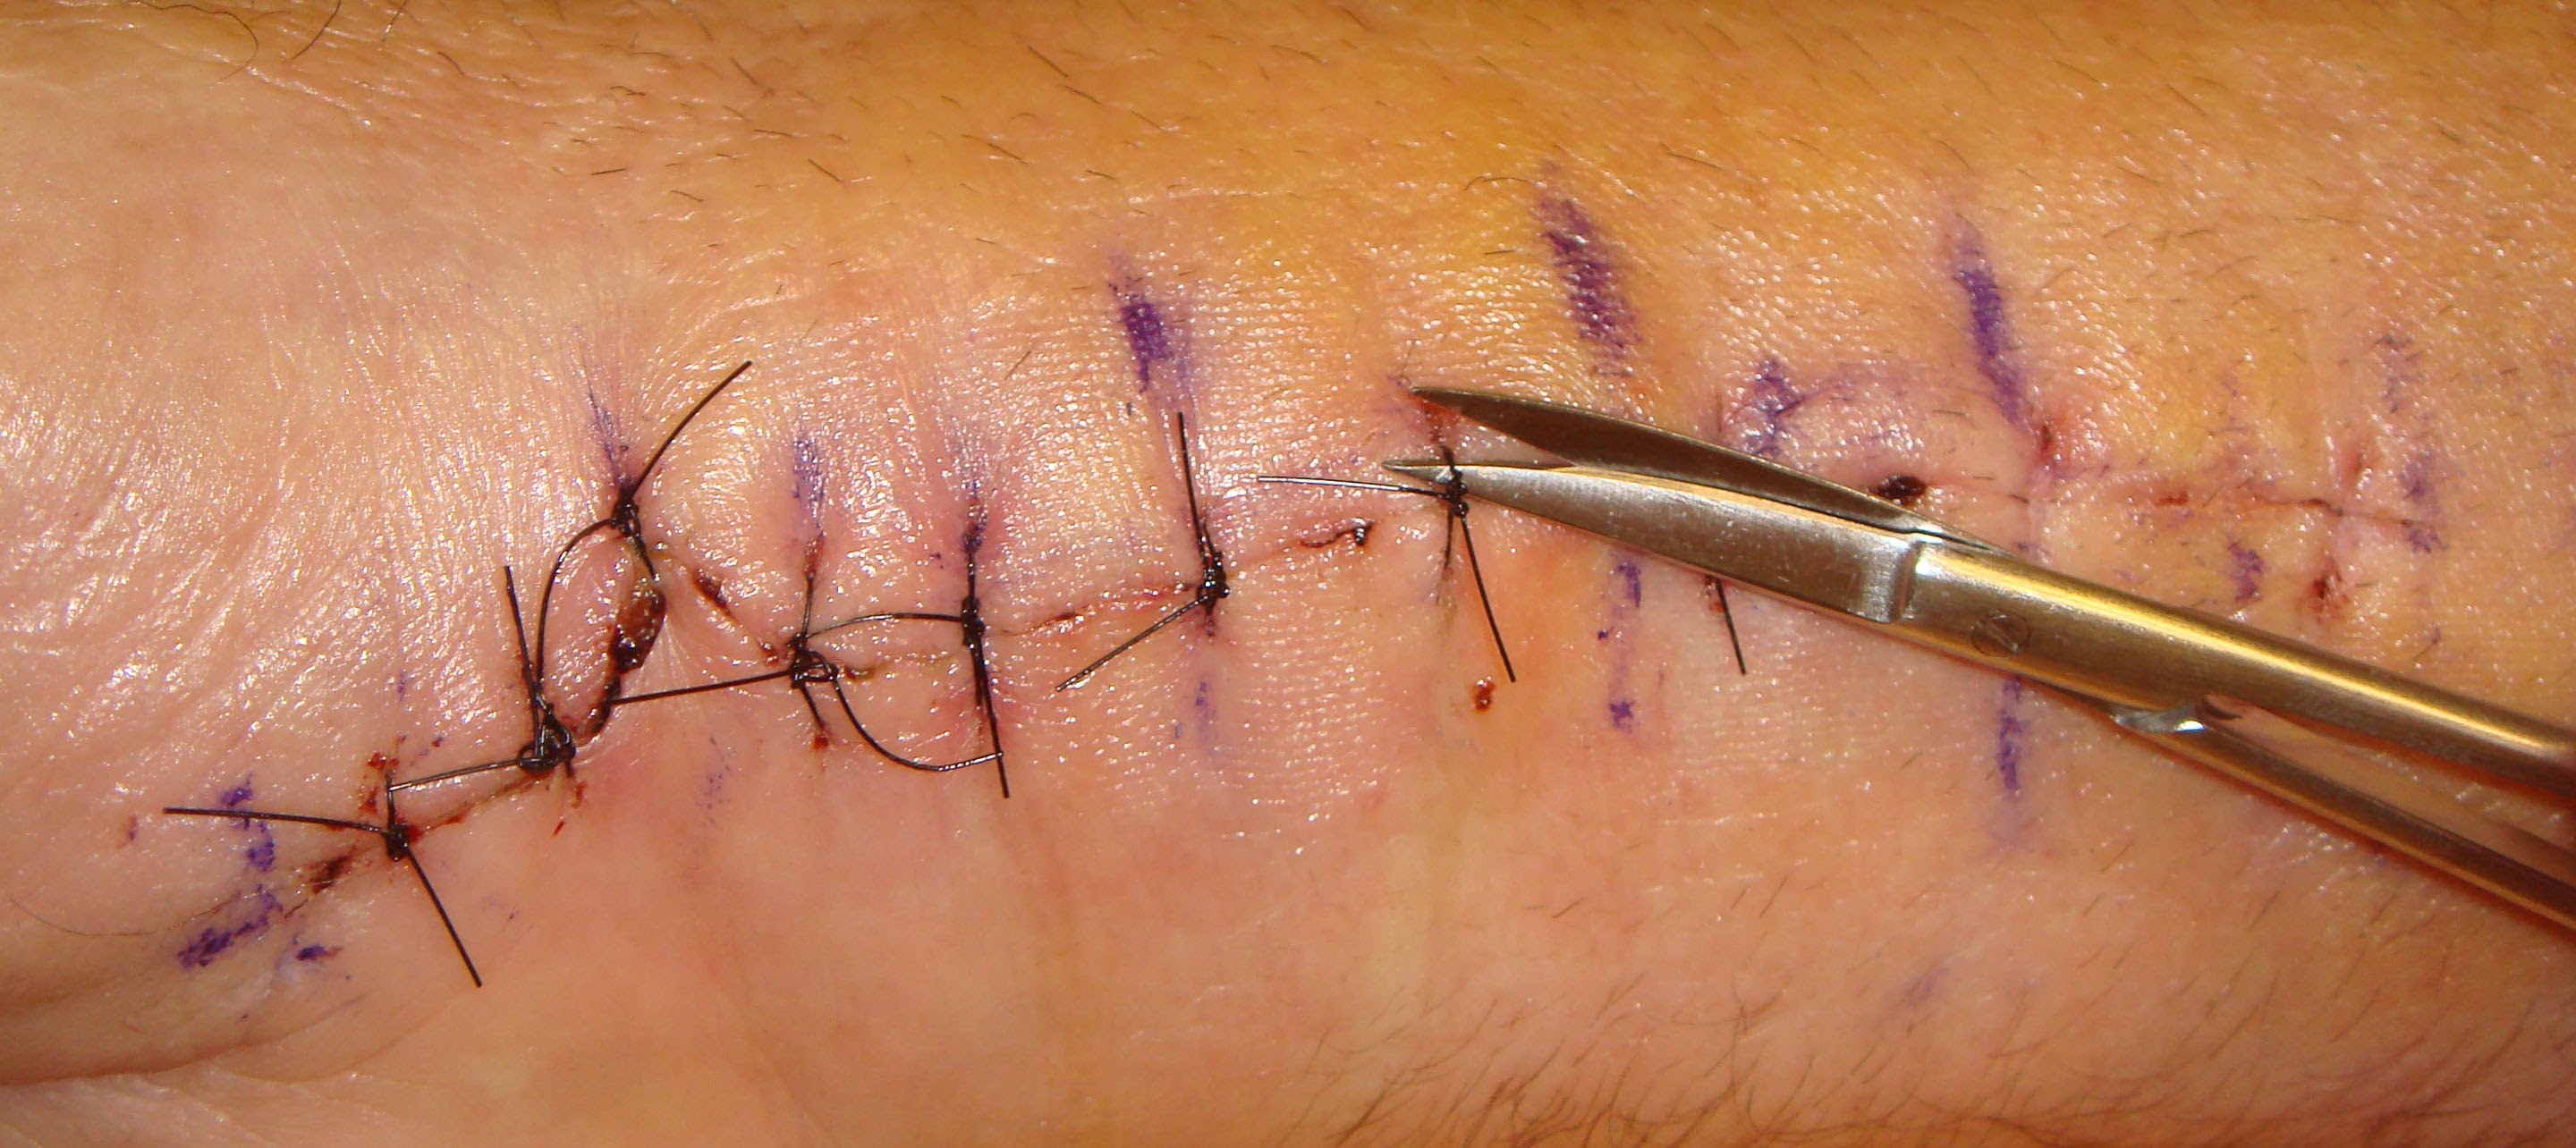 Suture Removal Protocol - YouTube